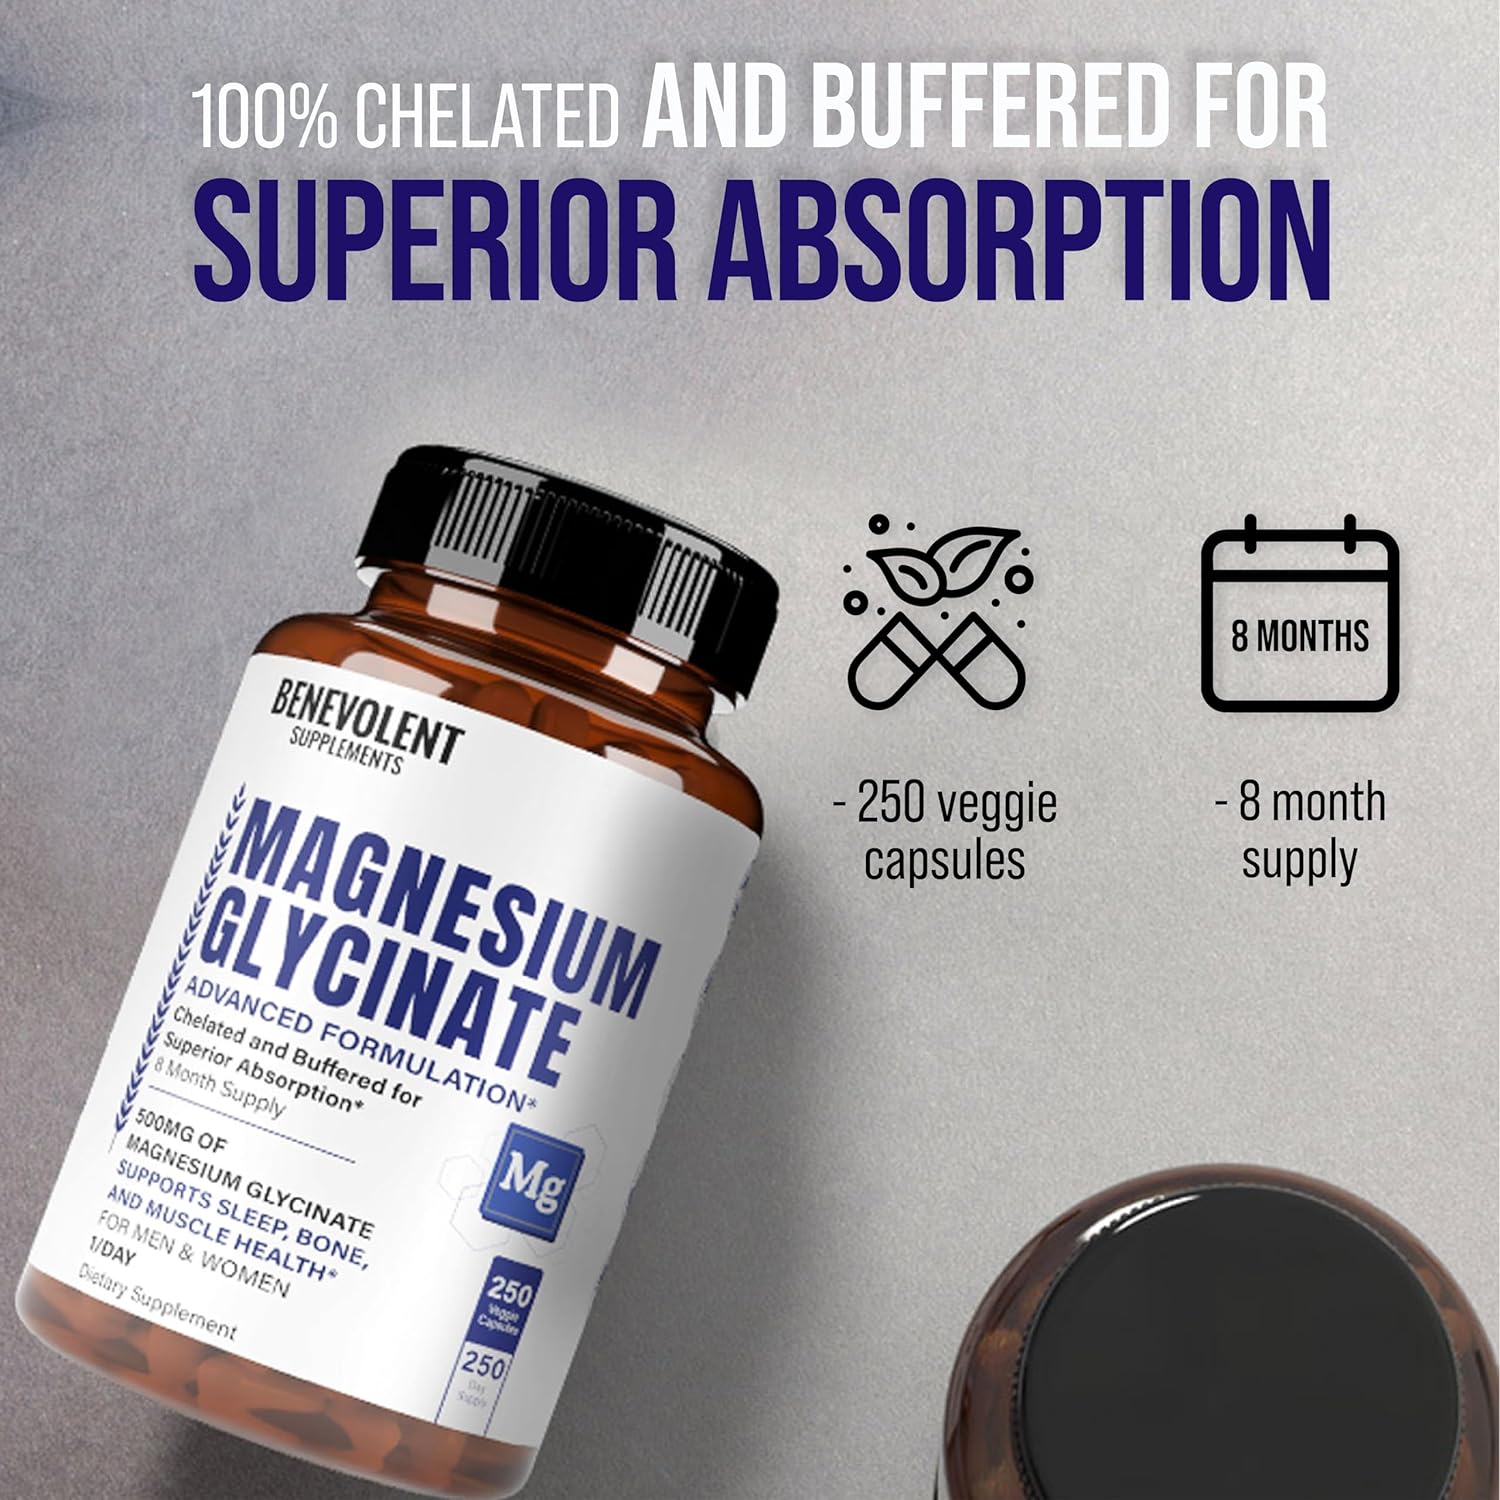 100% chelated and buffered for superior absorption